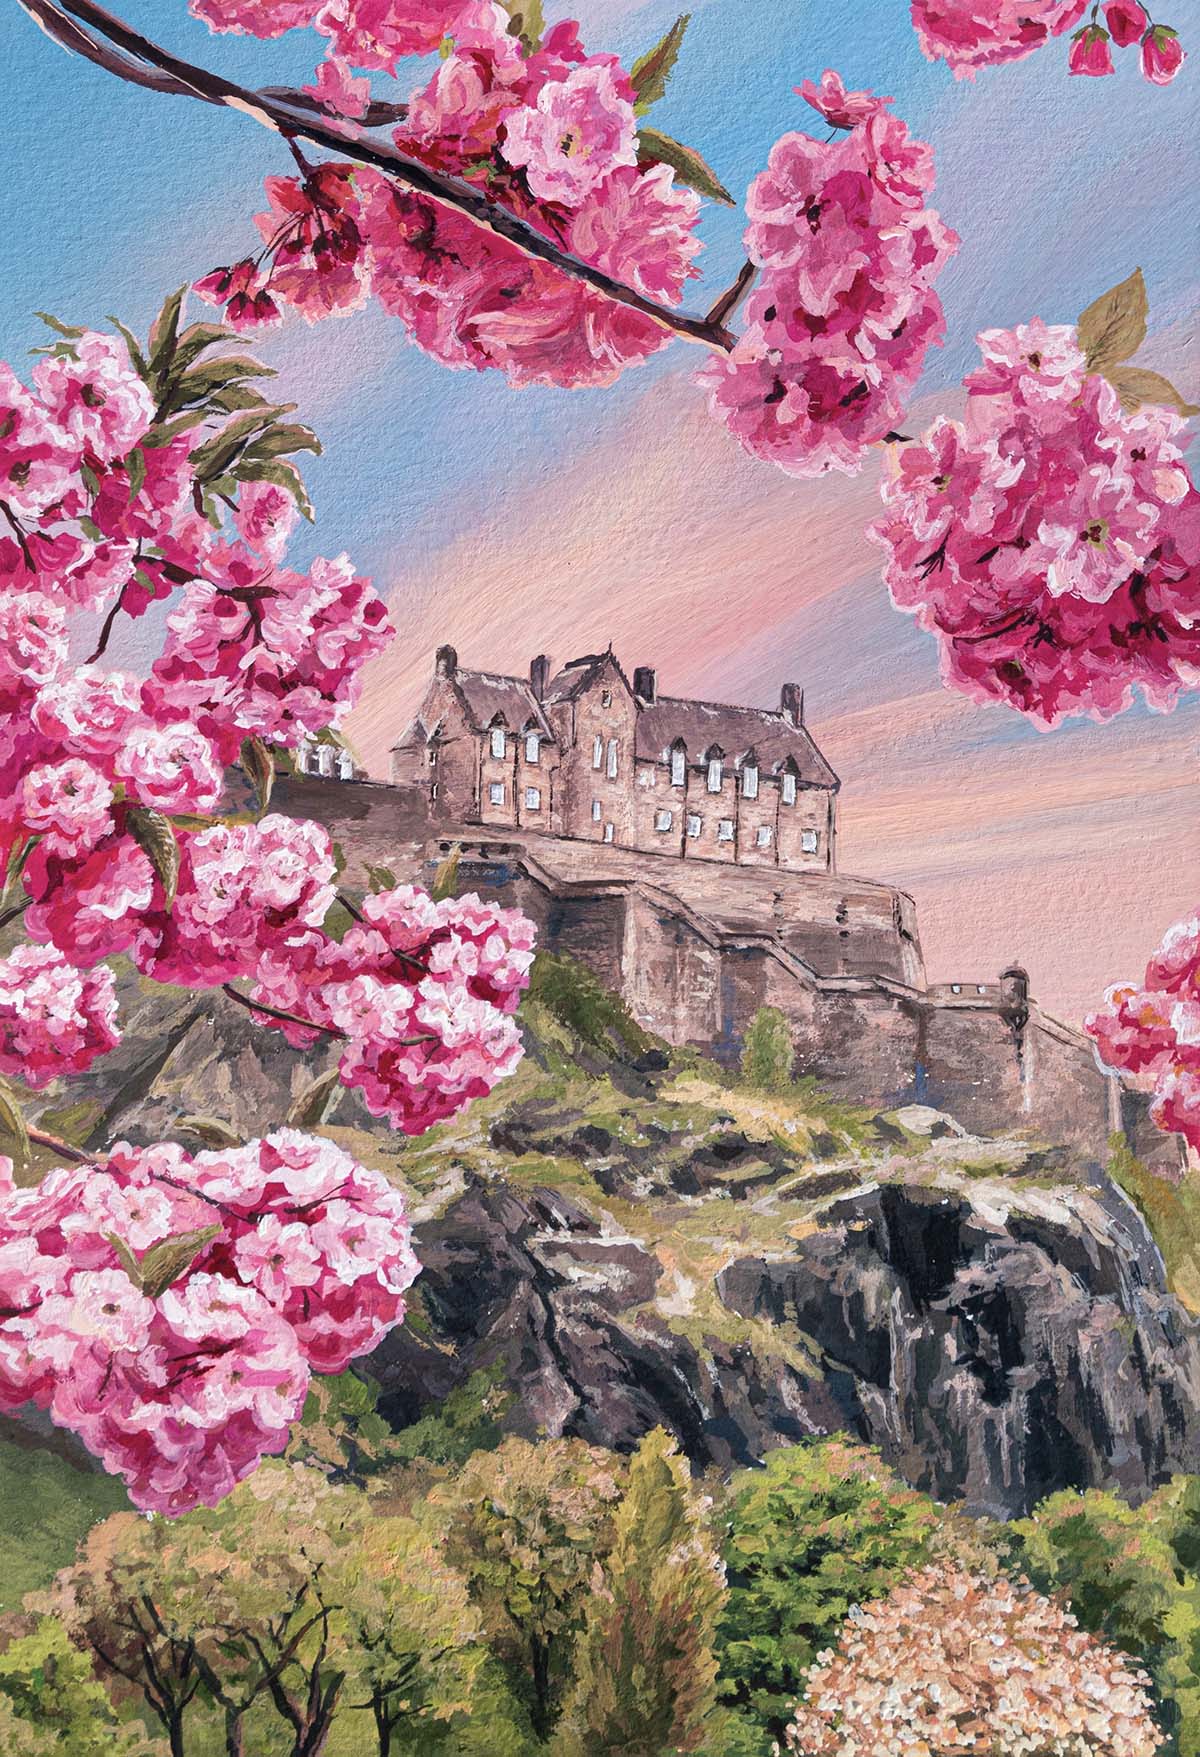 A view of Edinburgh Castle seen through branches of cherry blossom, by Holly Aitchison